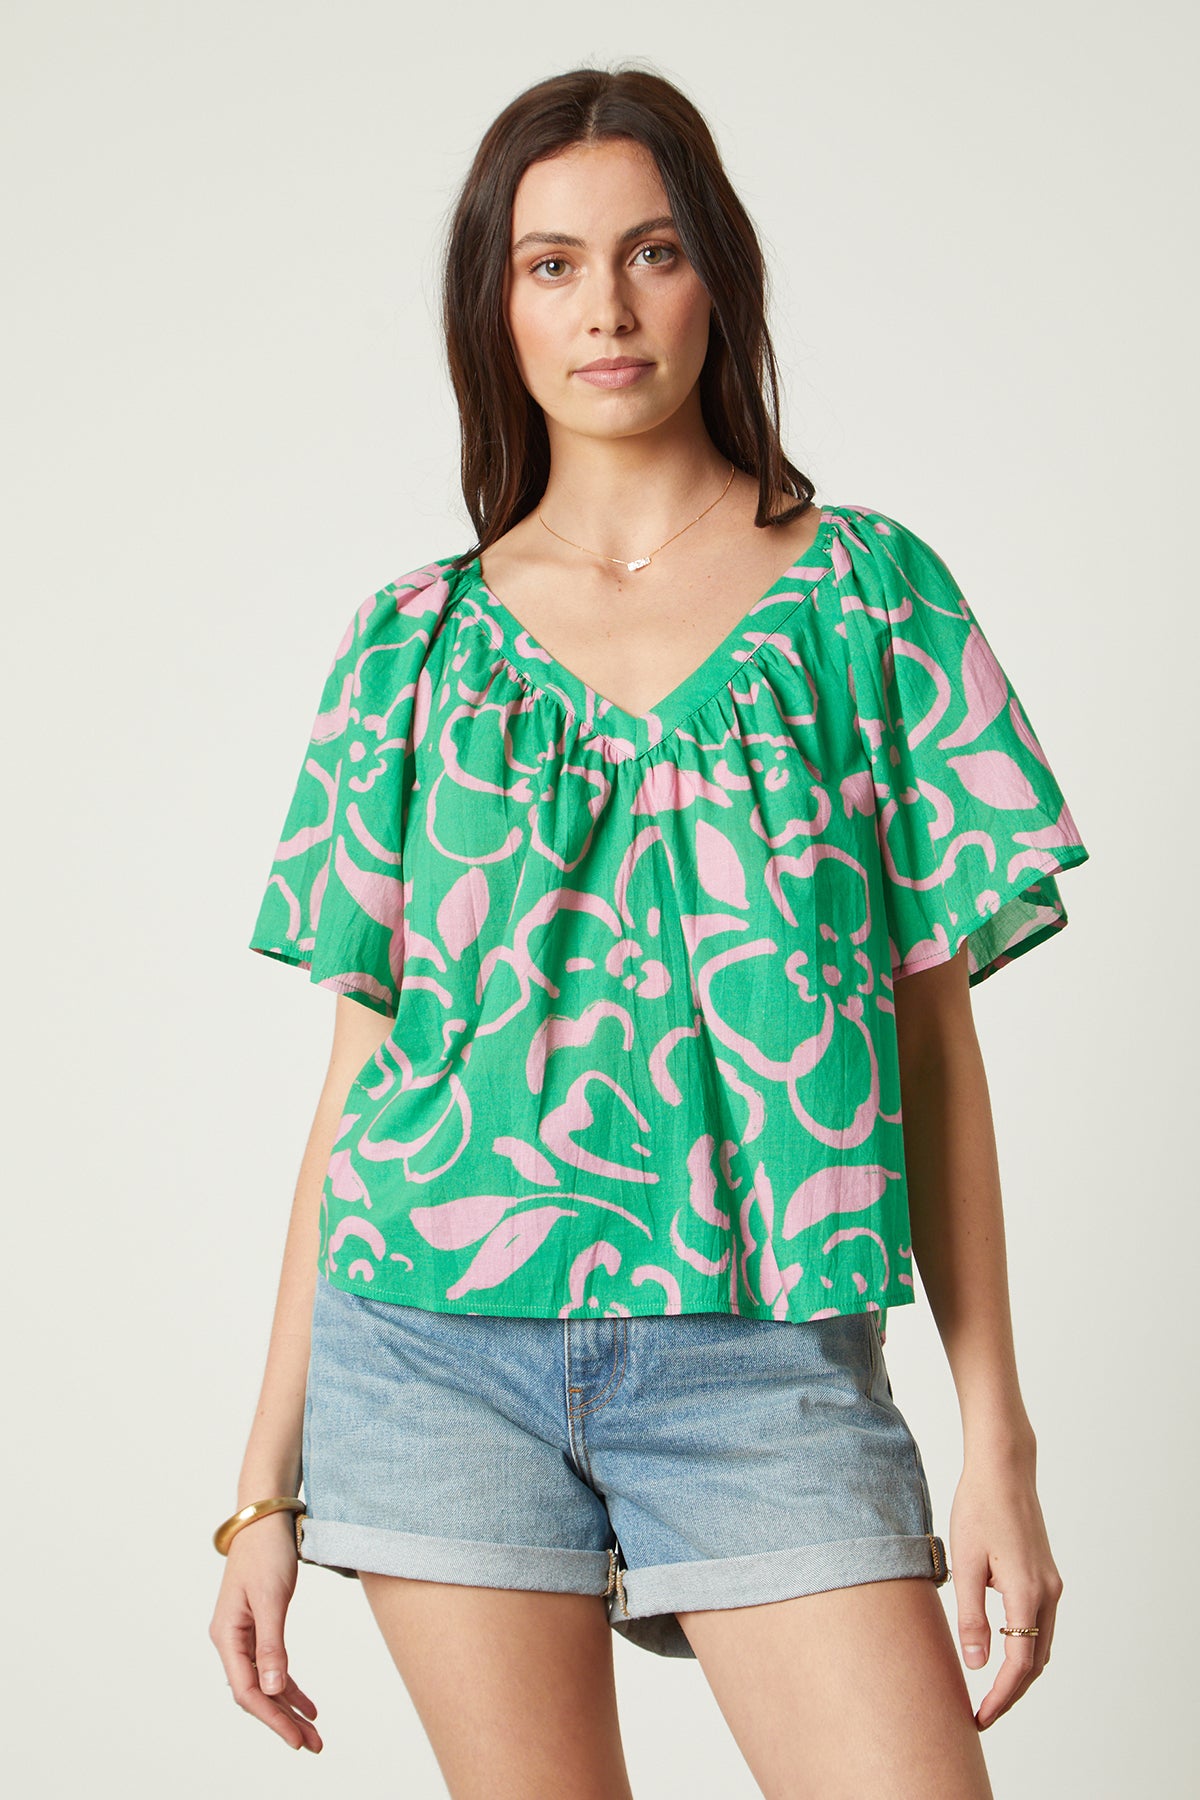   Liliana Top in print with green and pink front 